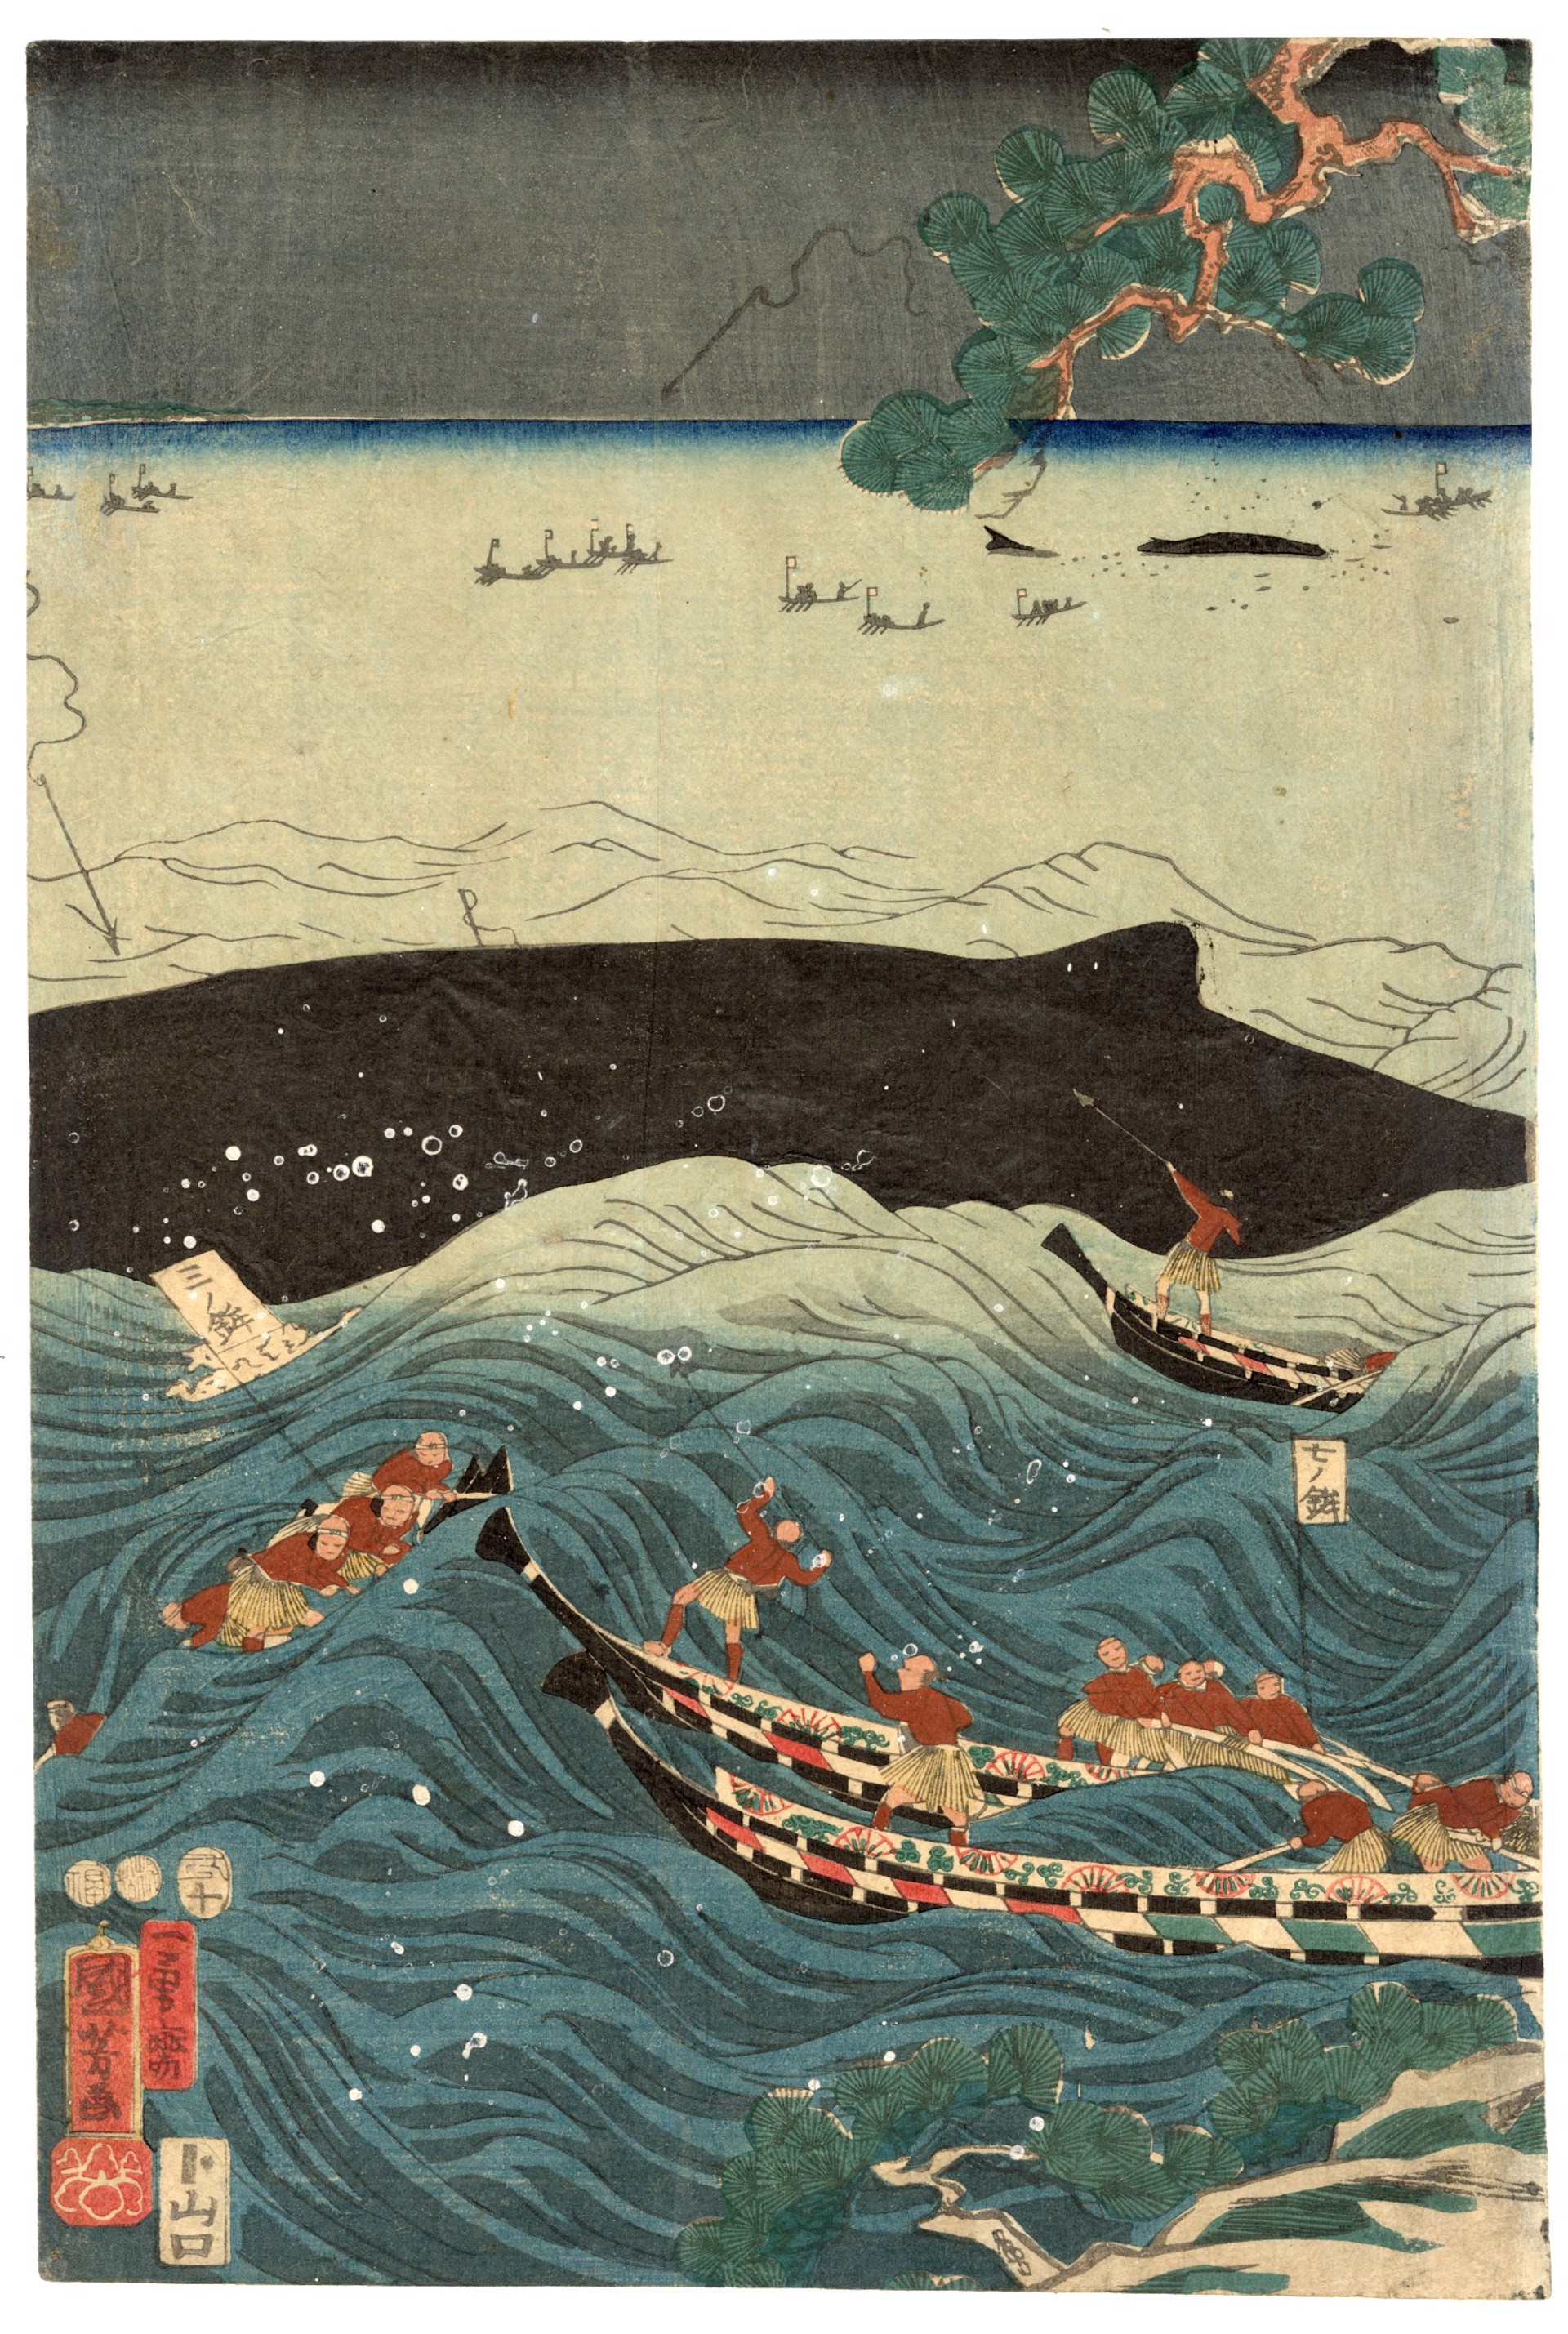 The Big Catch and Prosperity of the Seven Bays by Kuniyoshi